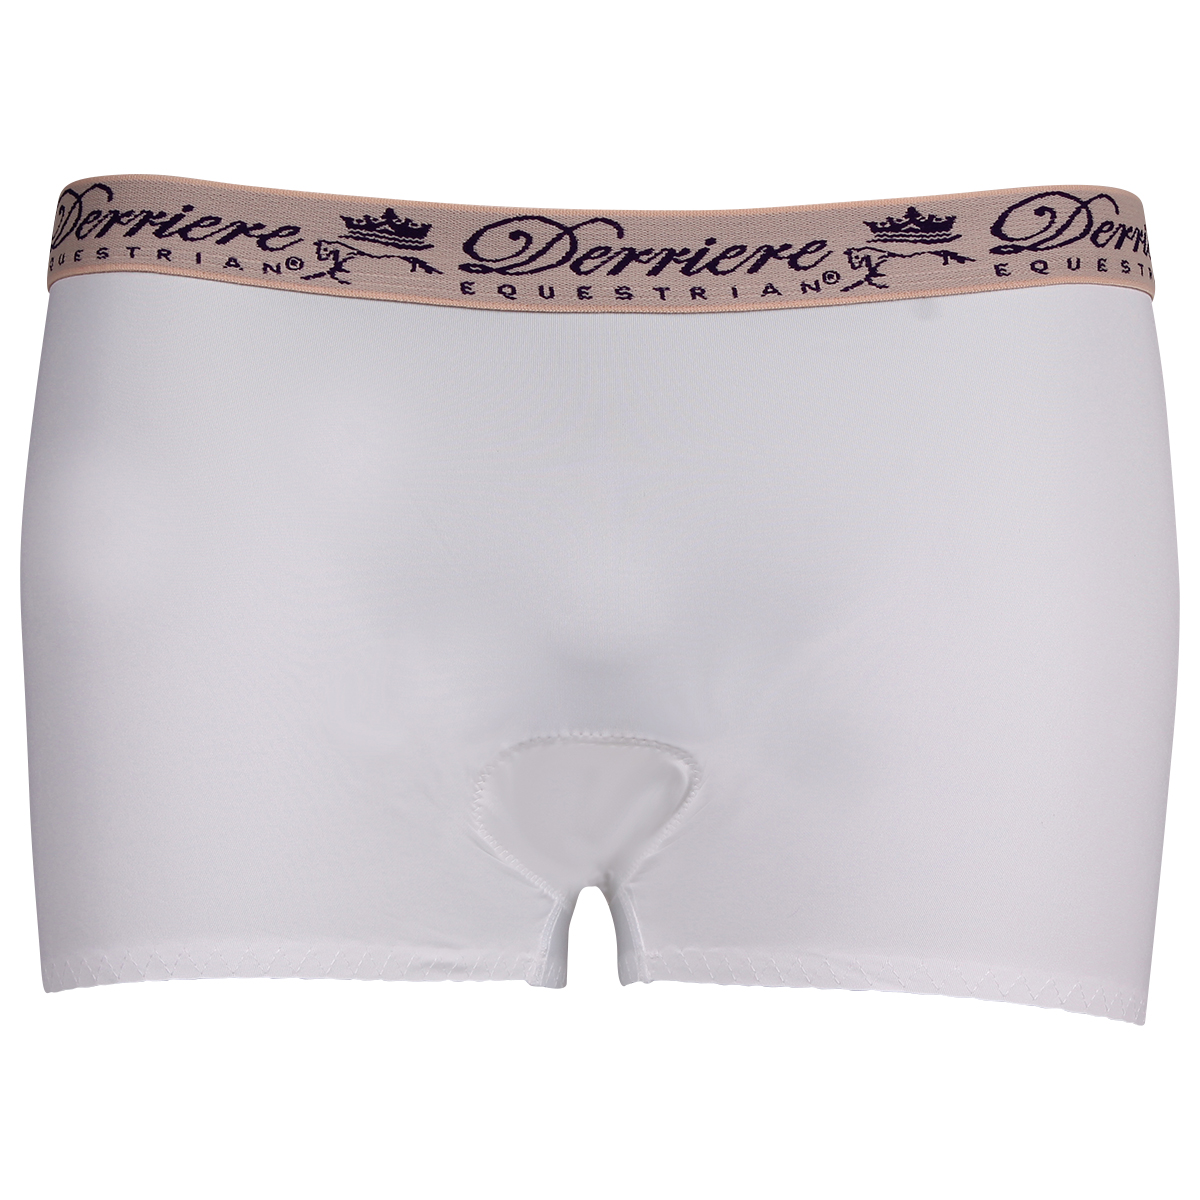 Shorty Derriere Equestrian Padded Female, M in wit